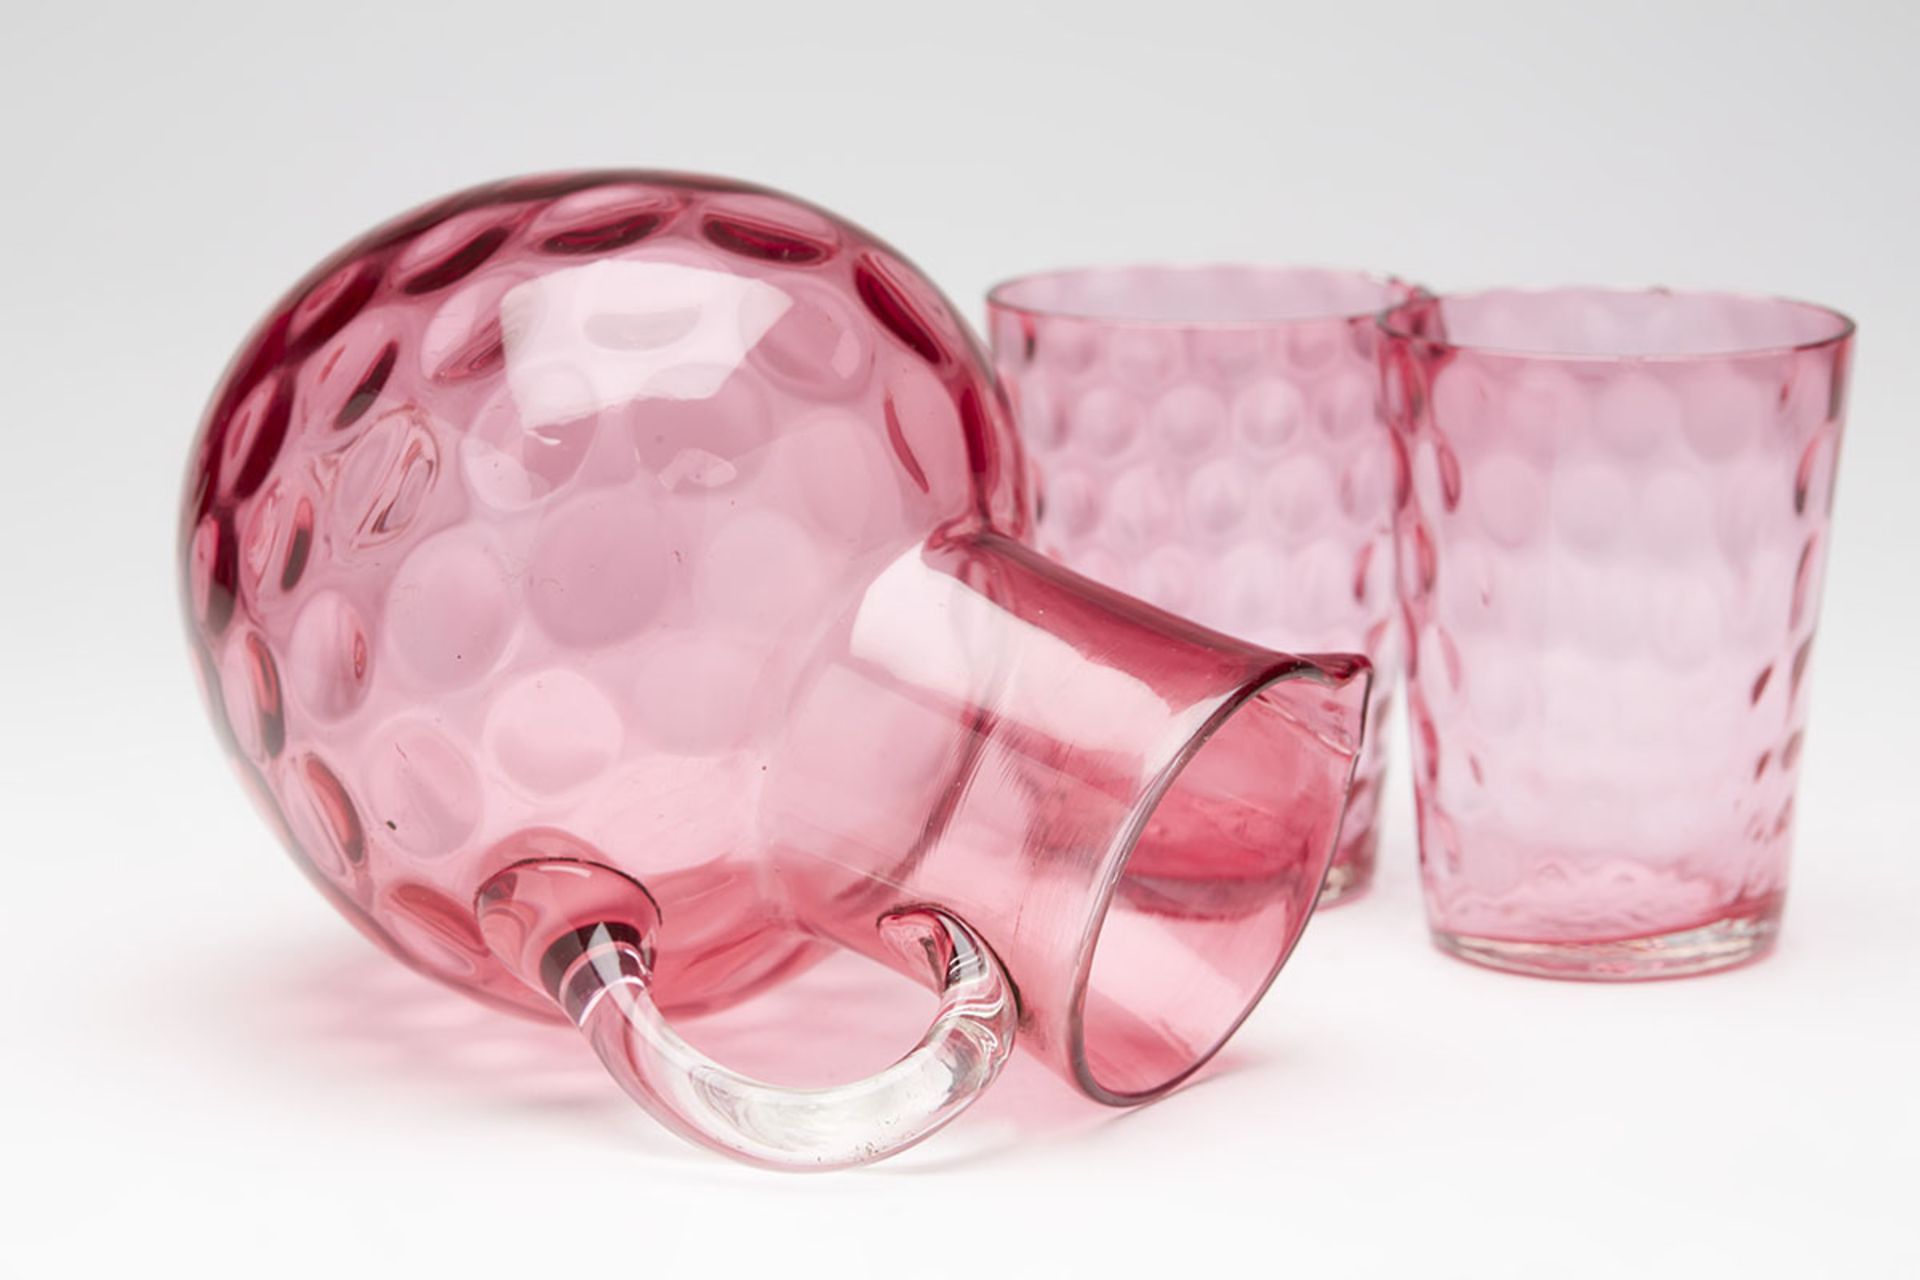 ANTIQUE CRANBERRY GLASS WATER JUG & MATCHING GLASSES 19TH C   DIMENSIONS   Height (max) 15cm - Image 8 of 8